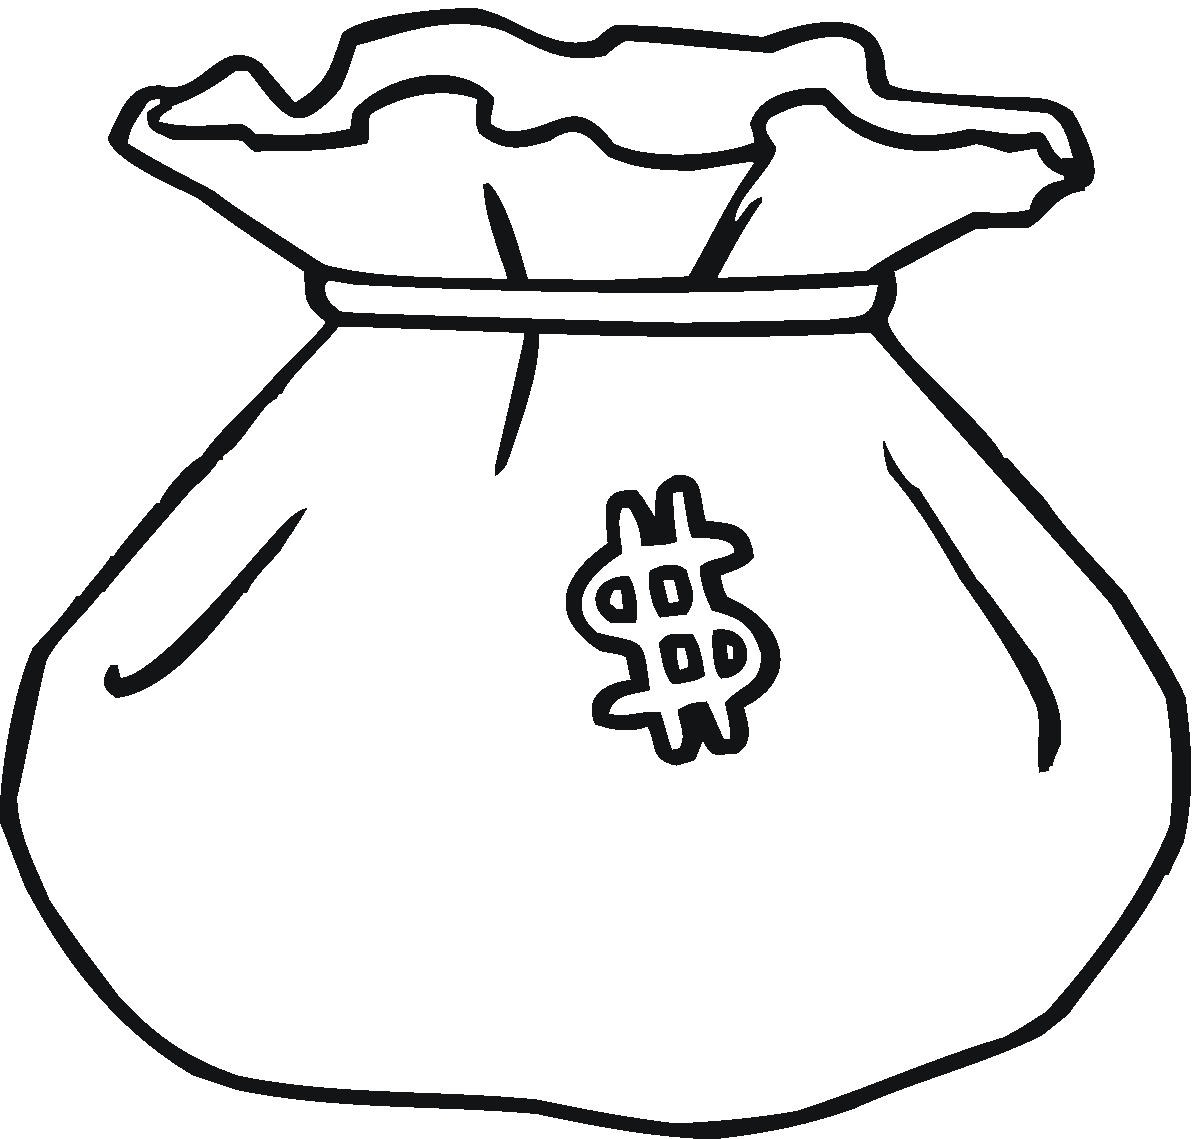 Clipart money bags free